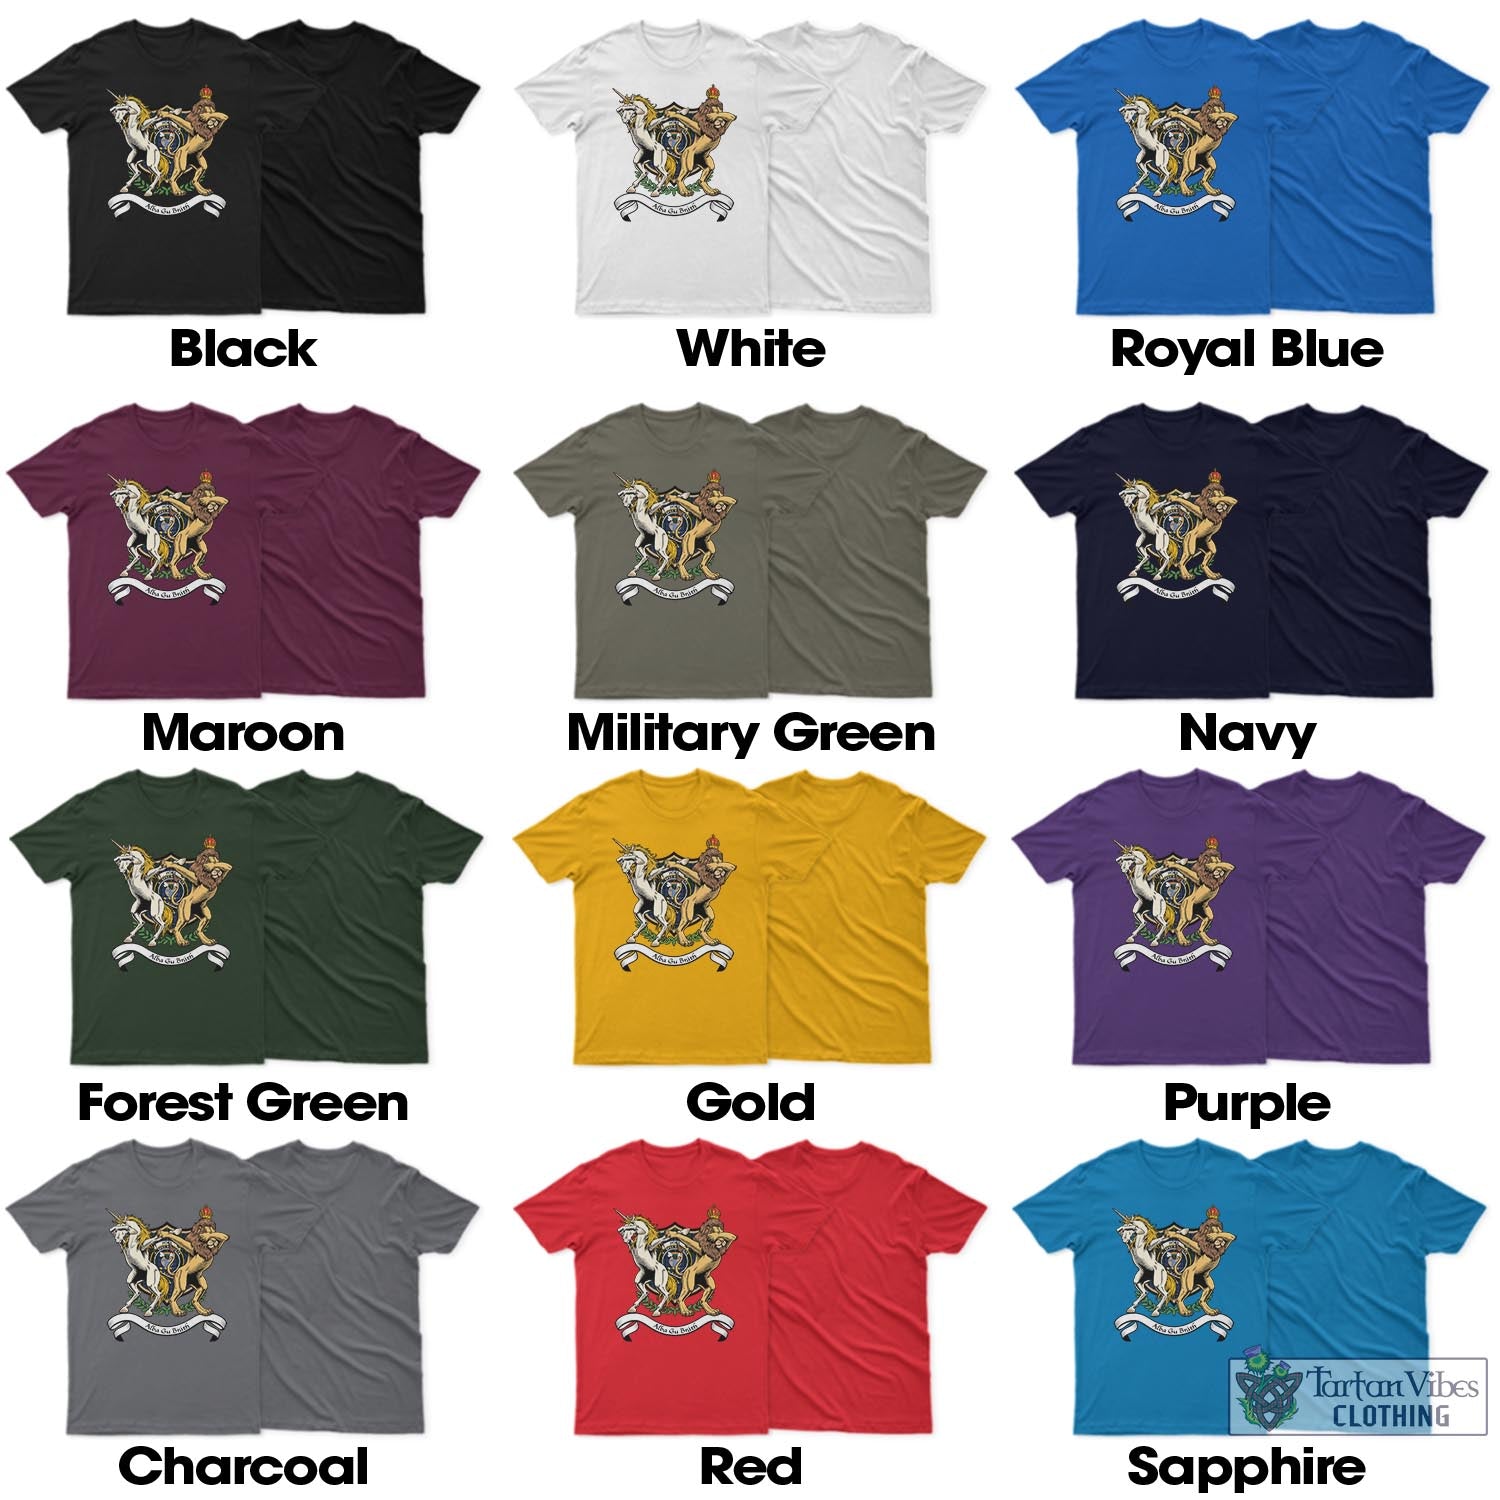 Tartan Vibes Clothing Hope Clan Originaux Family Crest Cotton Men's T-Shirt with Scotland Royal Coat Of Arm Funny Style